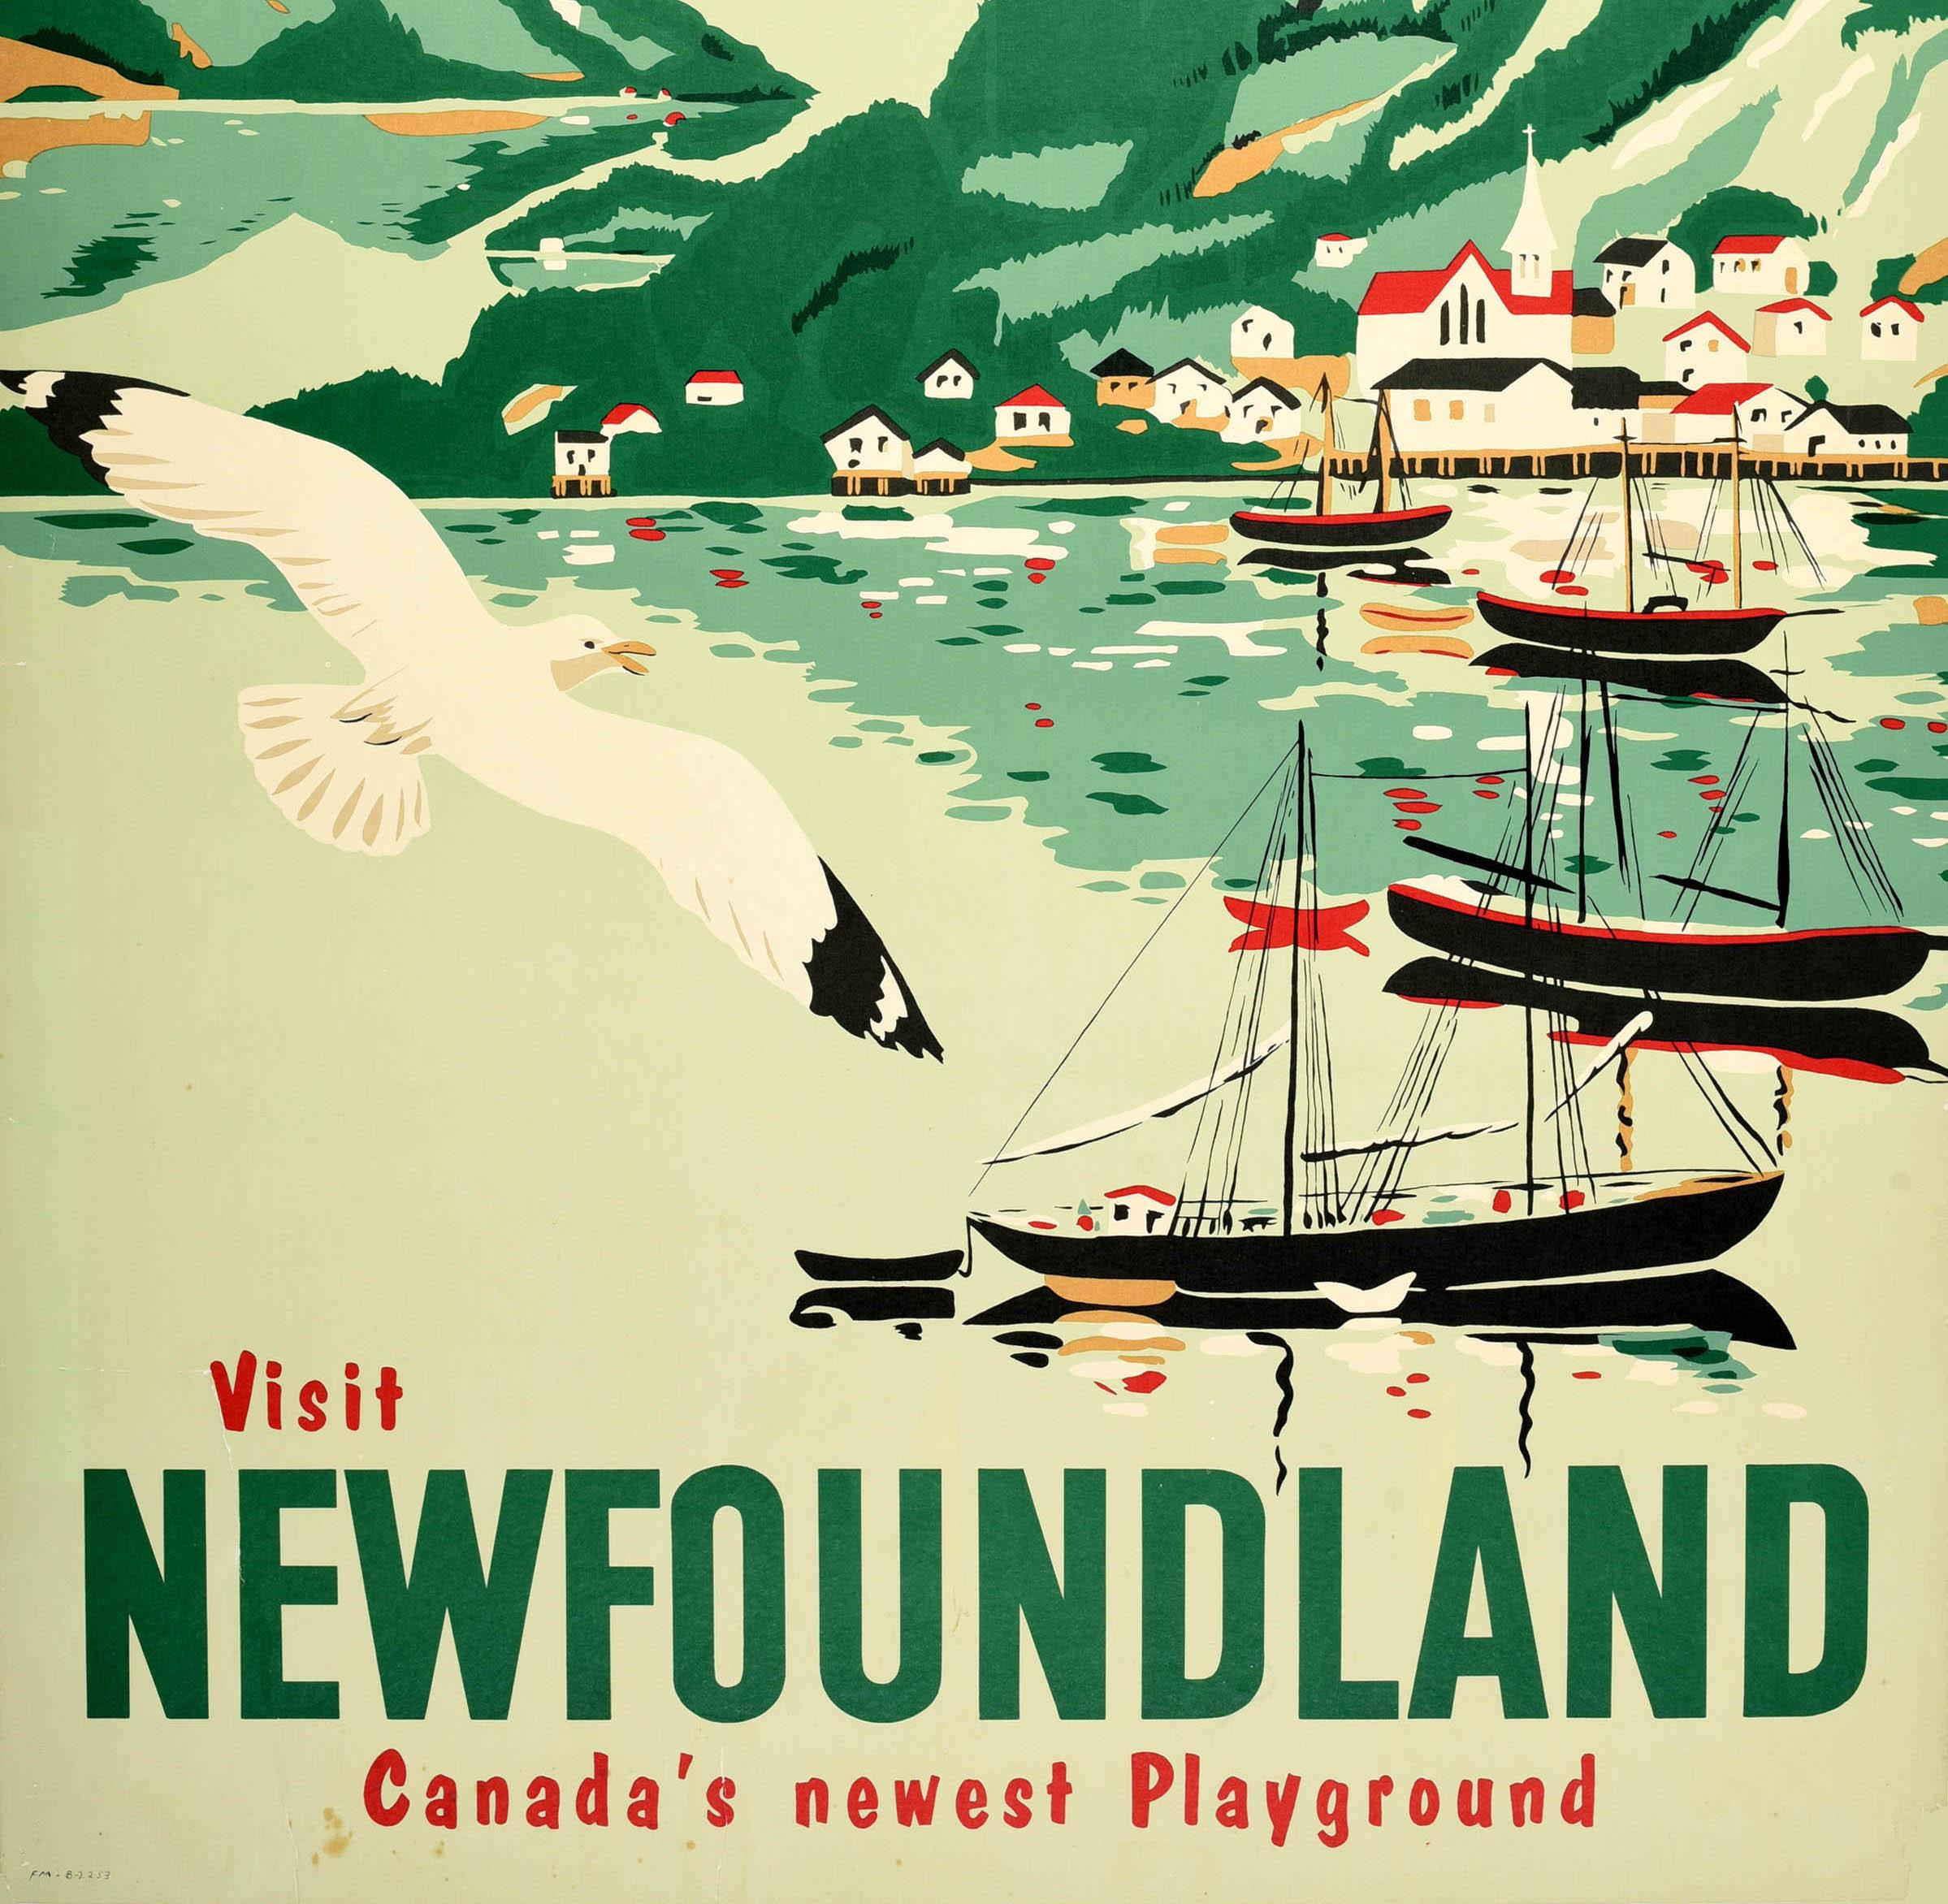 1950s travel posters